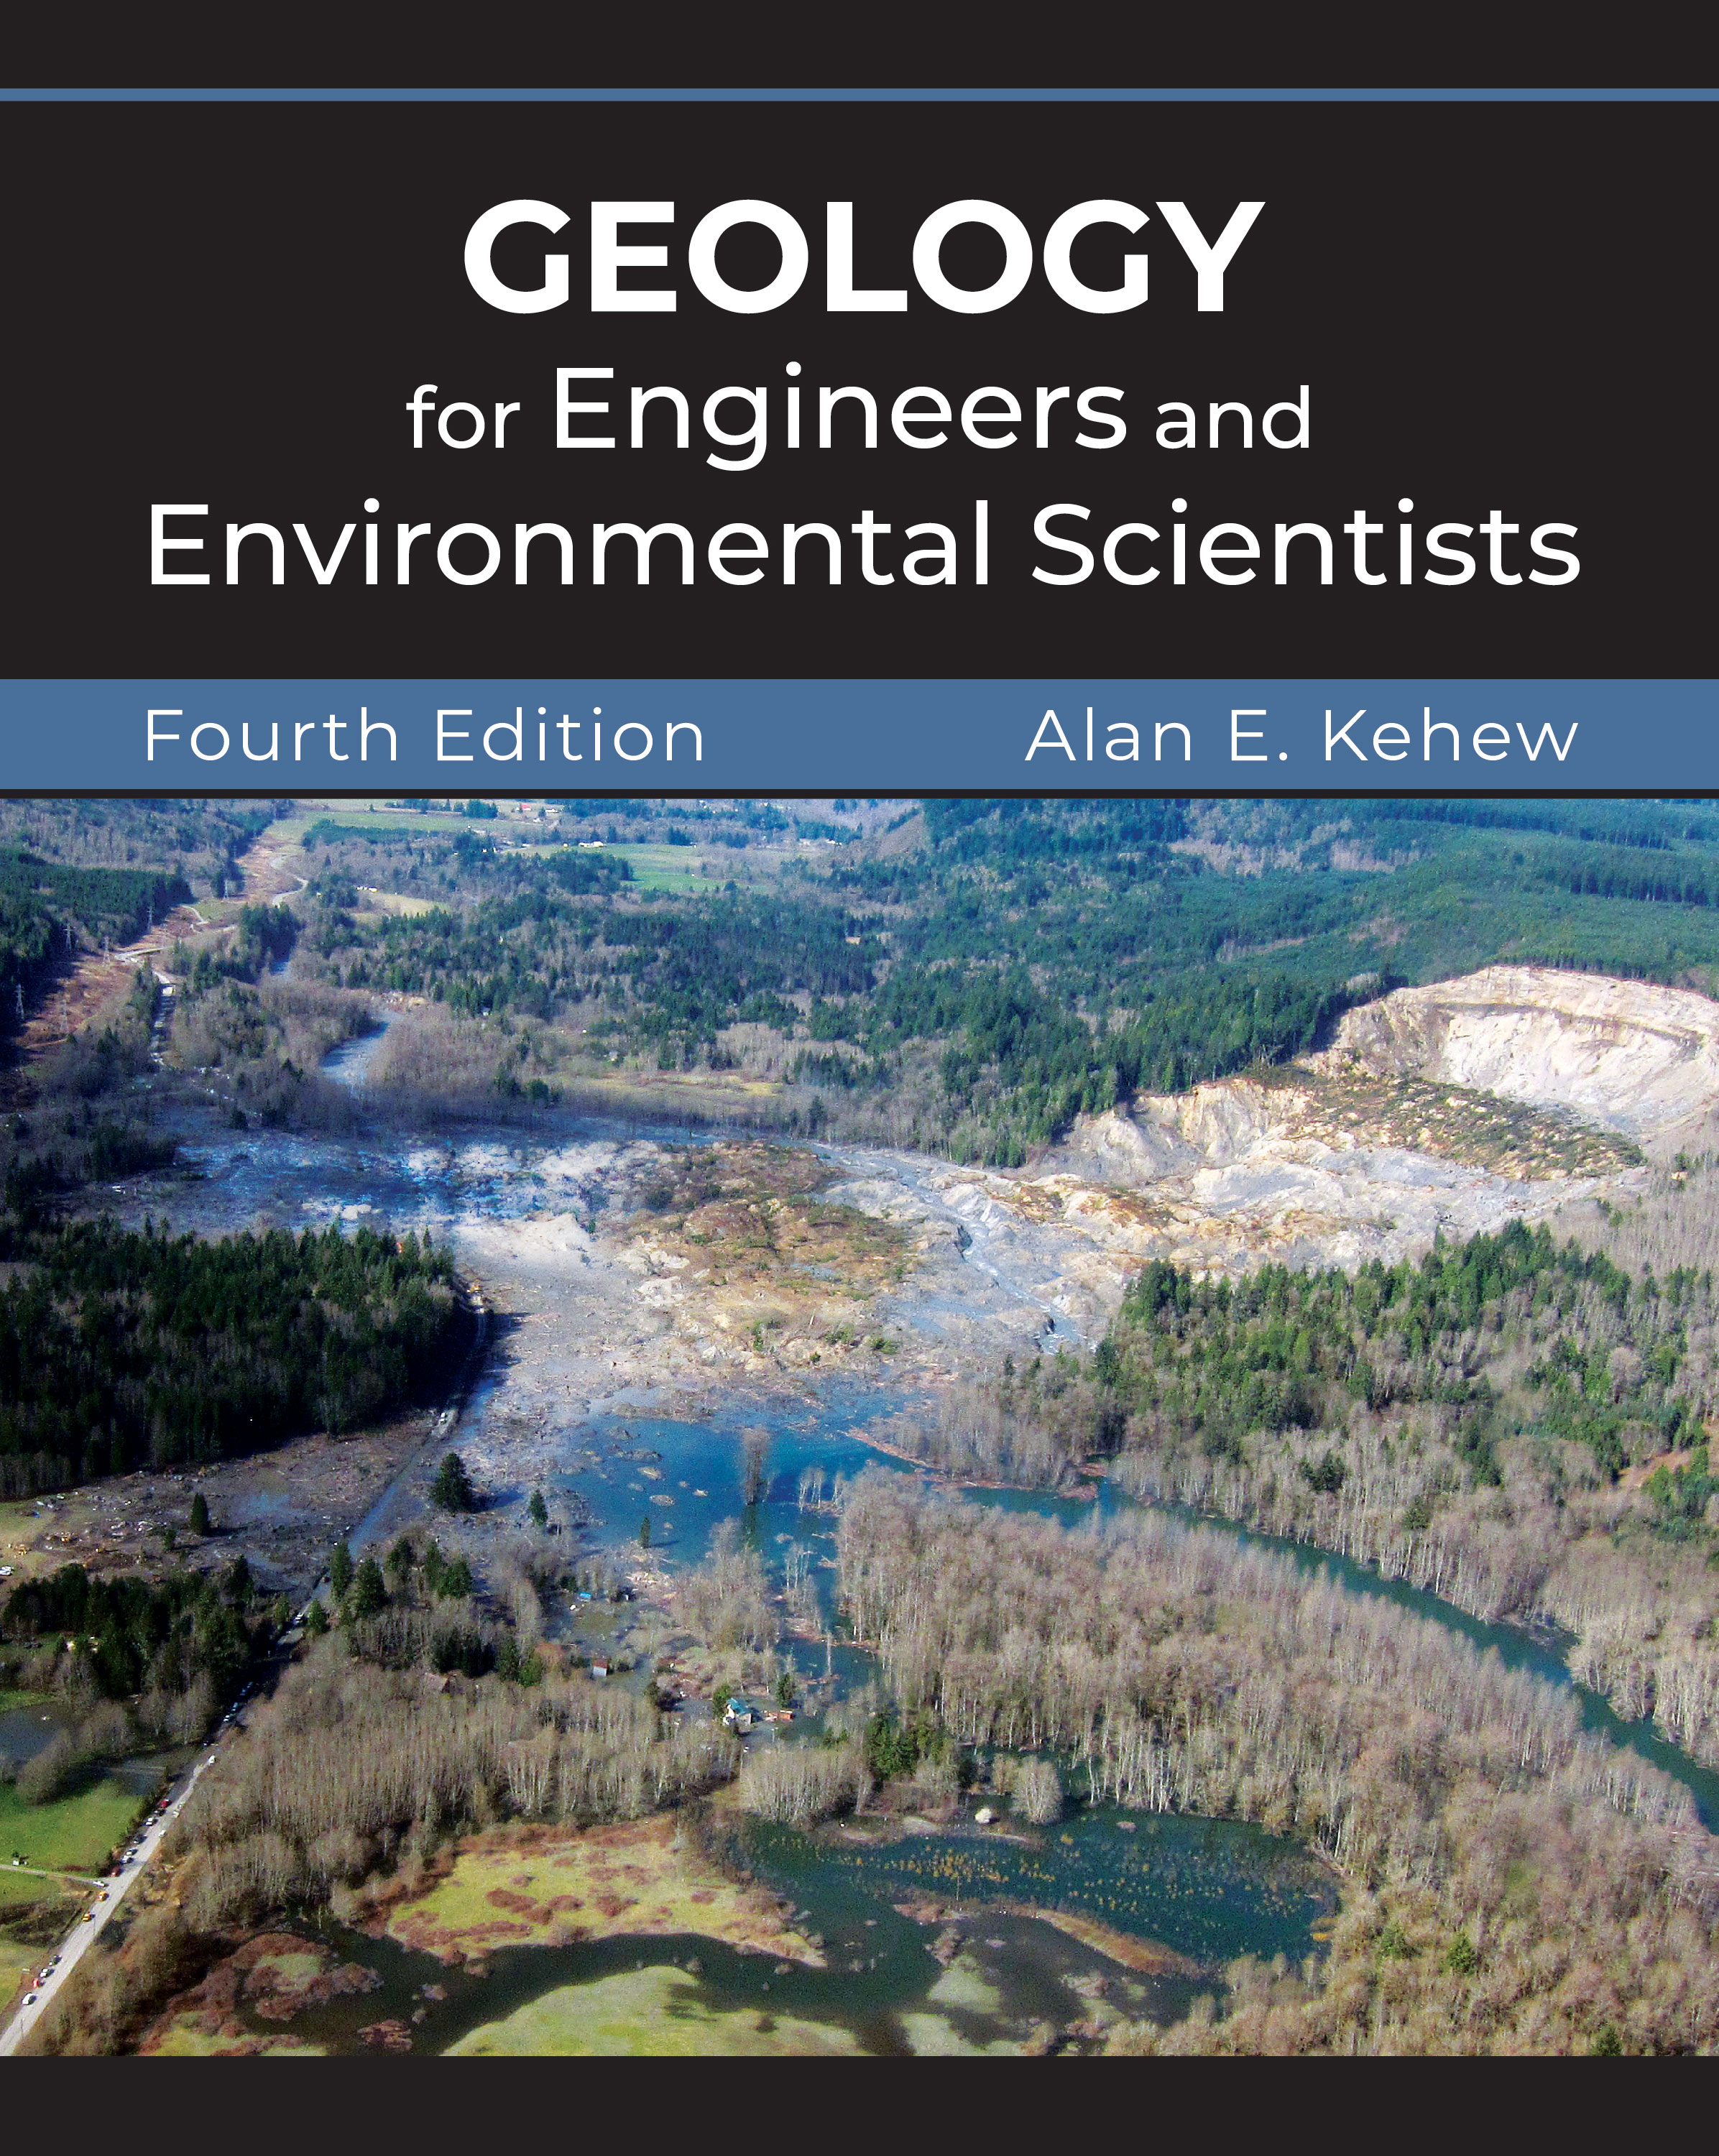 Geology for Engineers and Environmental Scientists: Fourth Edition by Alan E. Kehew